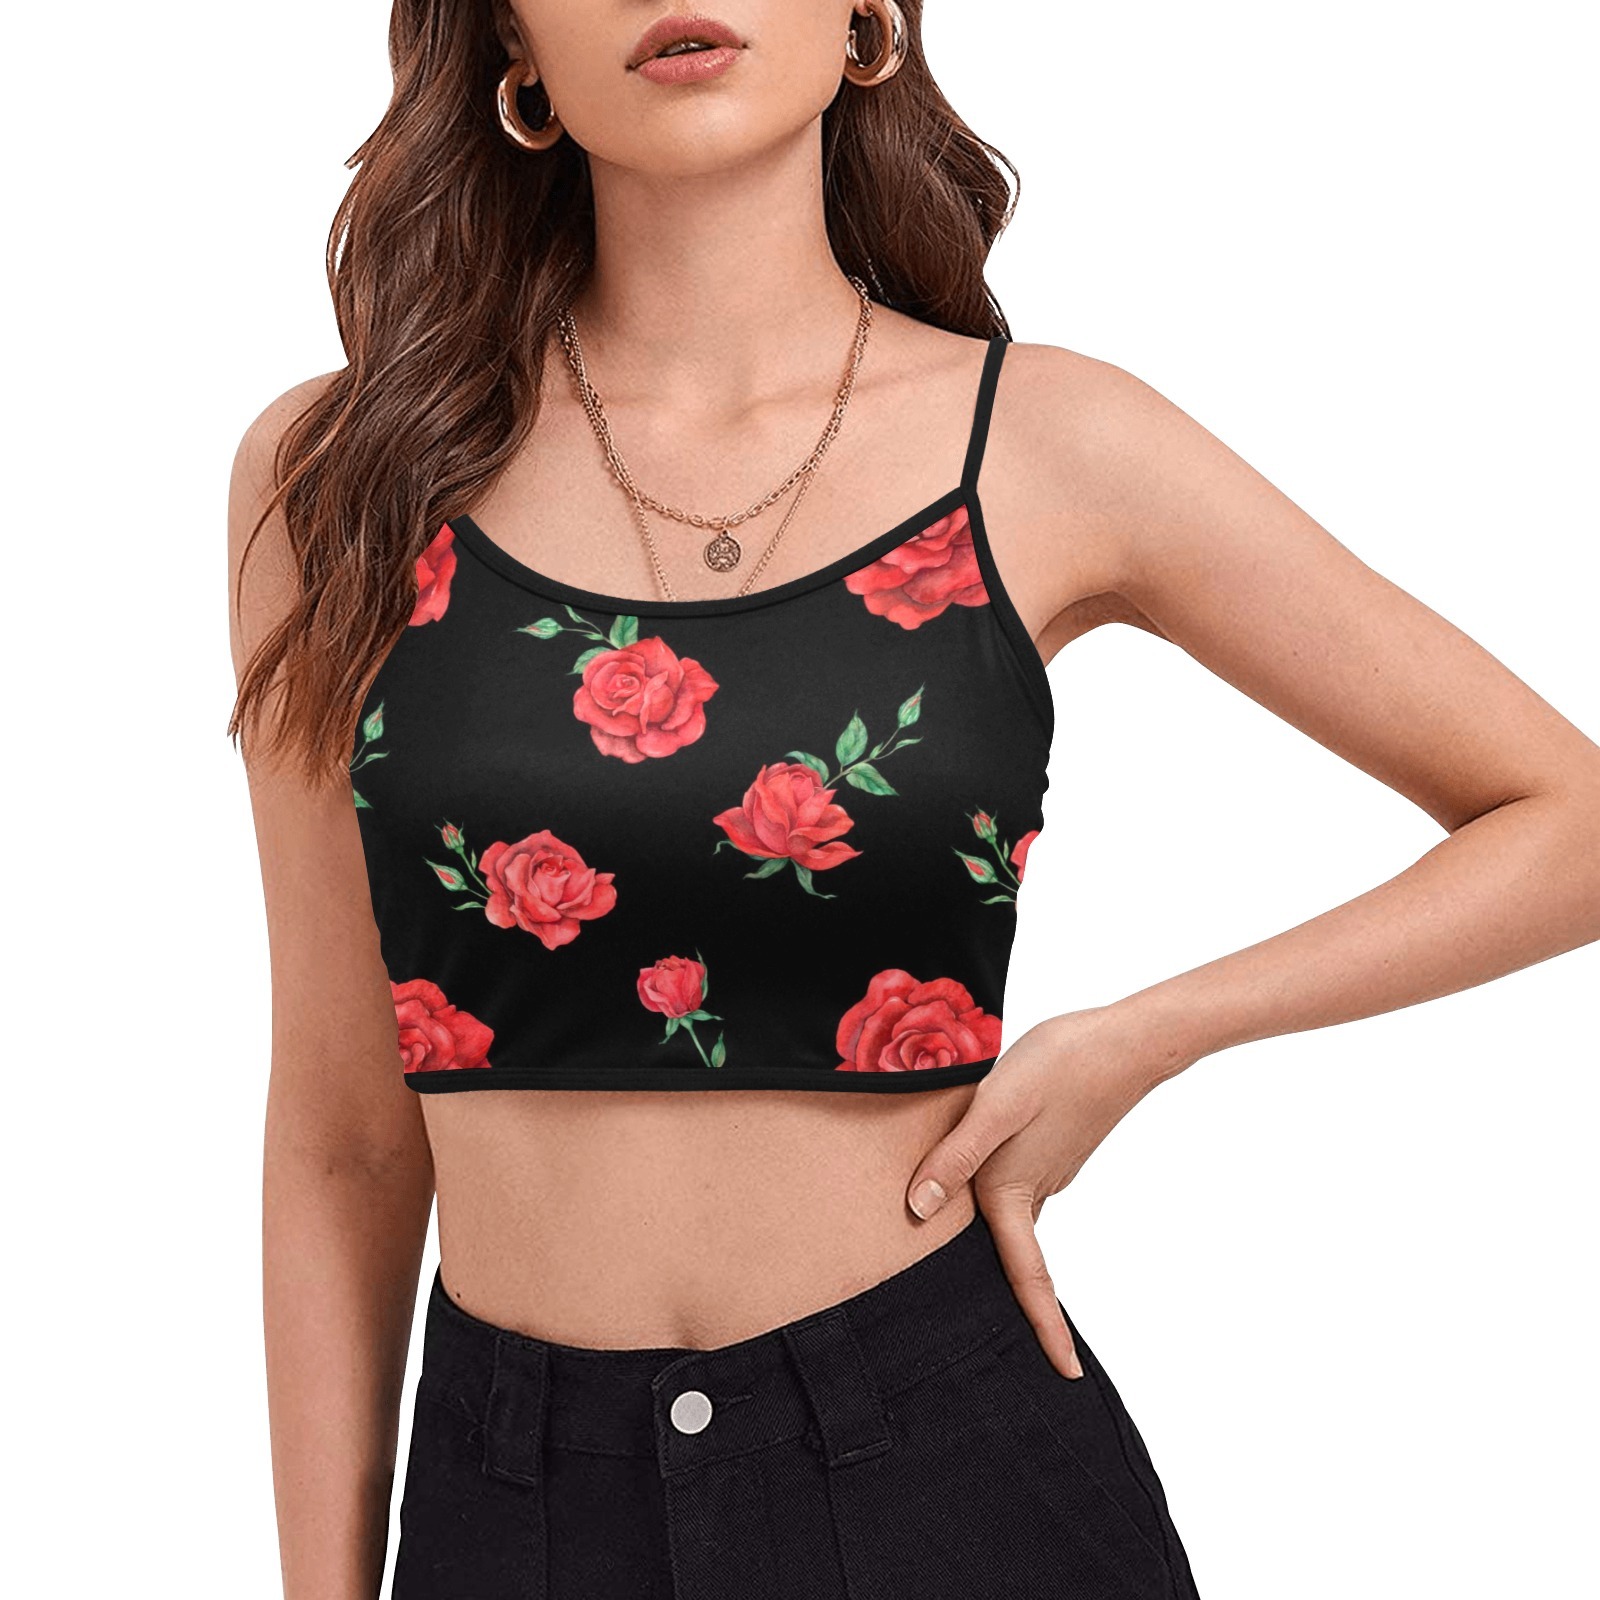 Women's Red Roses Flower Floral Spaghetti Strap Crop Top Camisole Camis Tanks